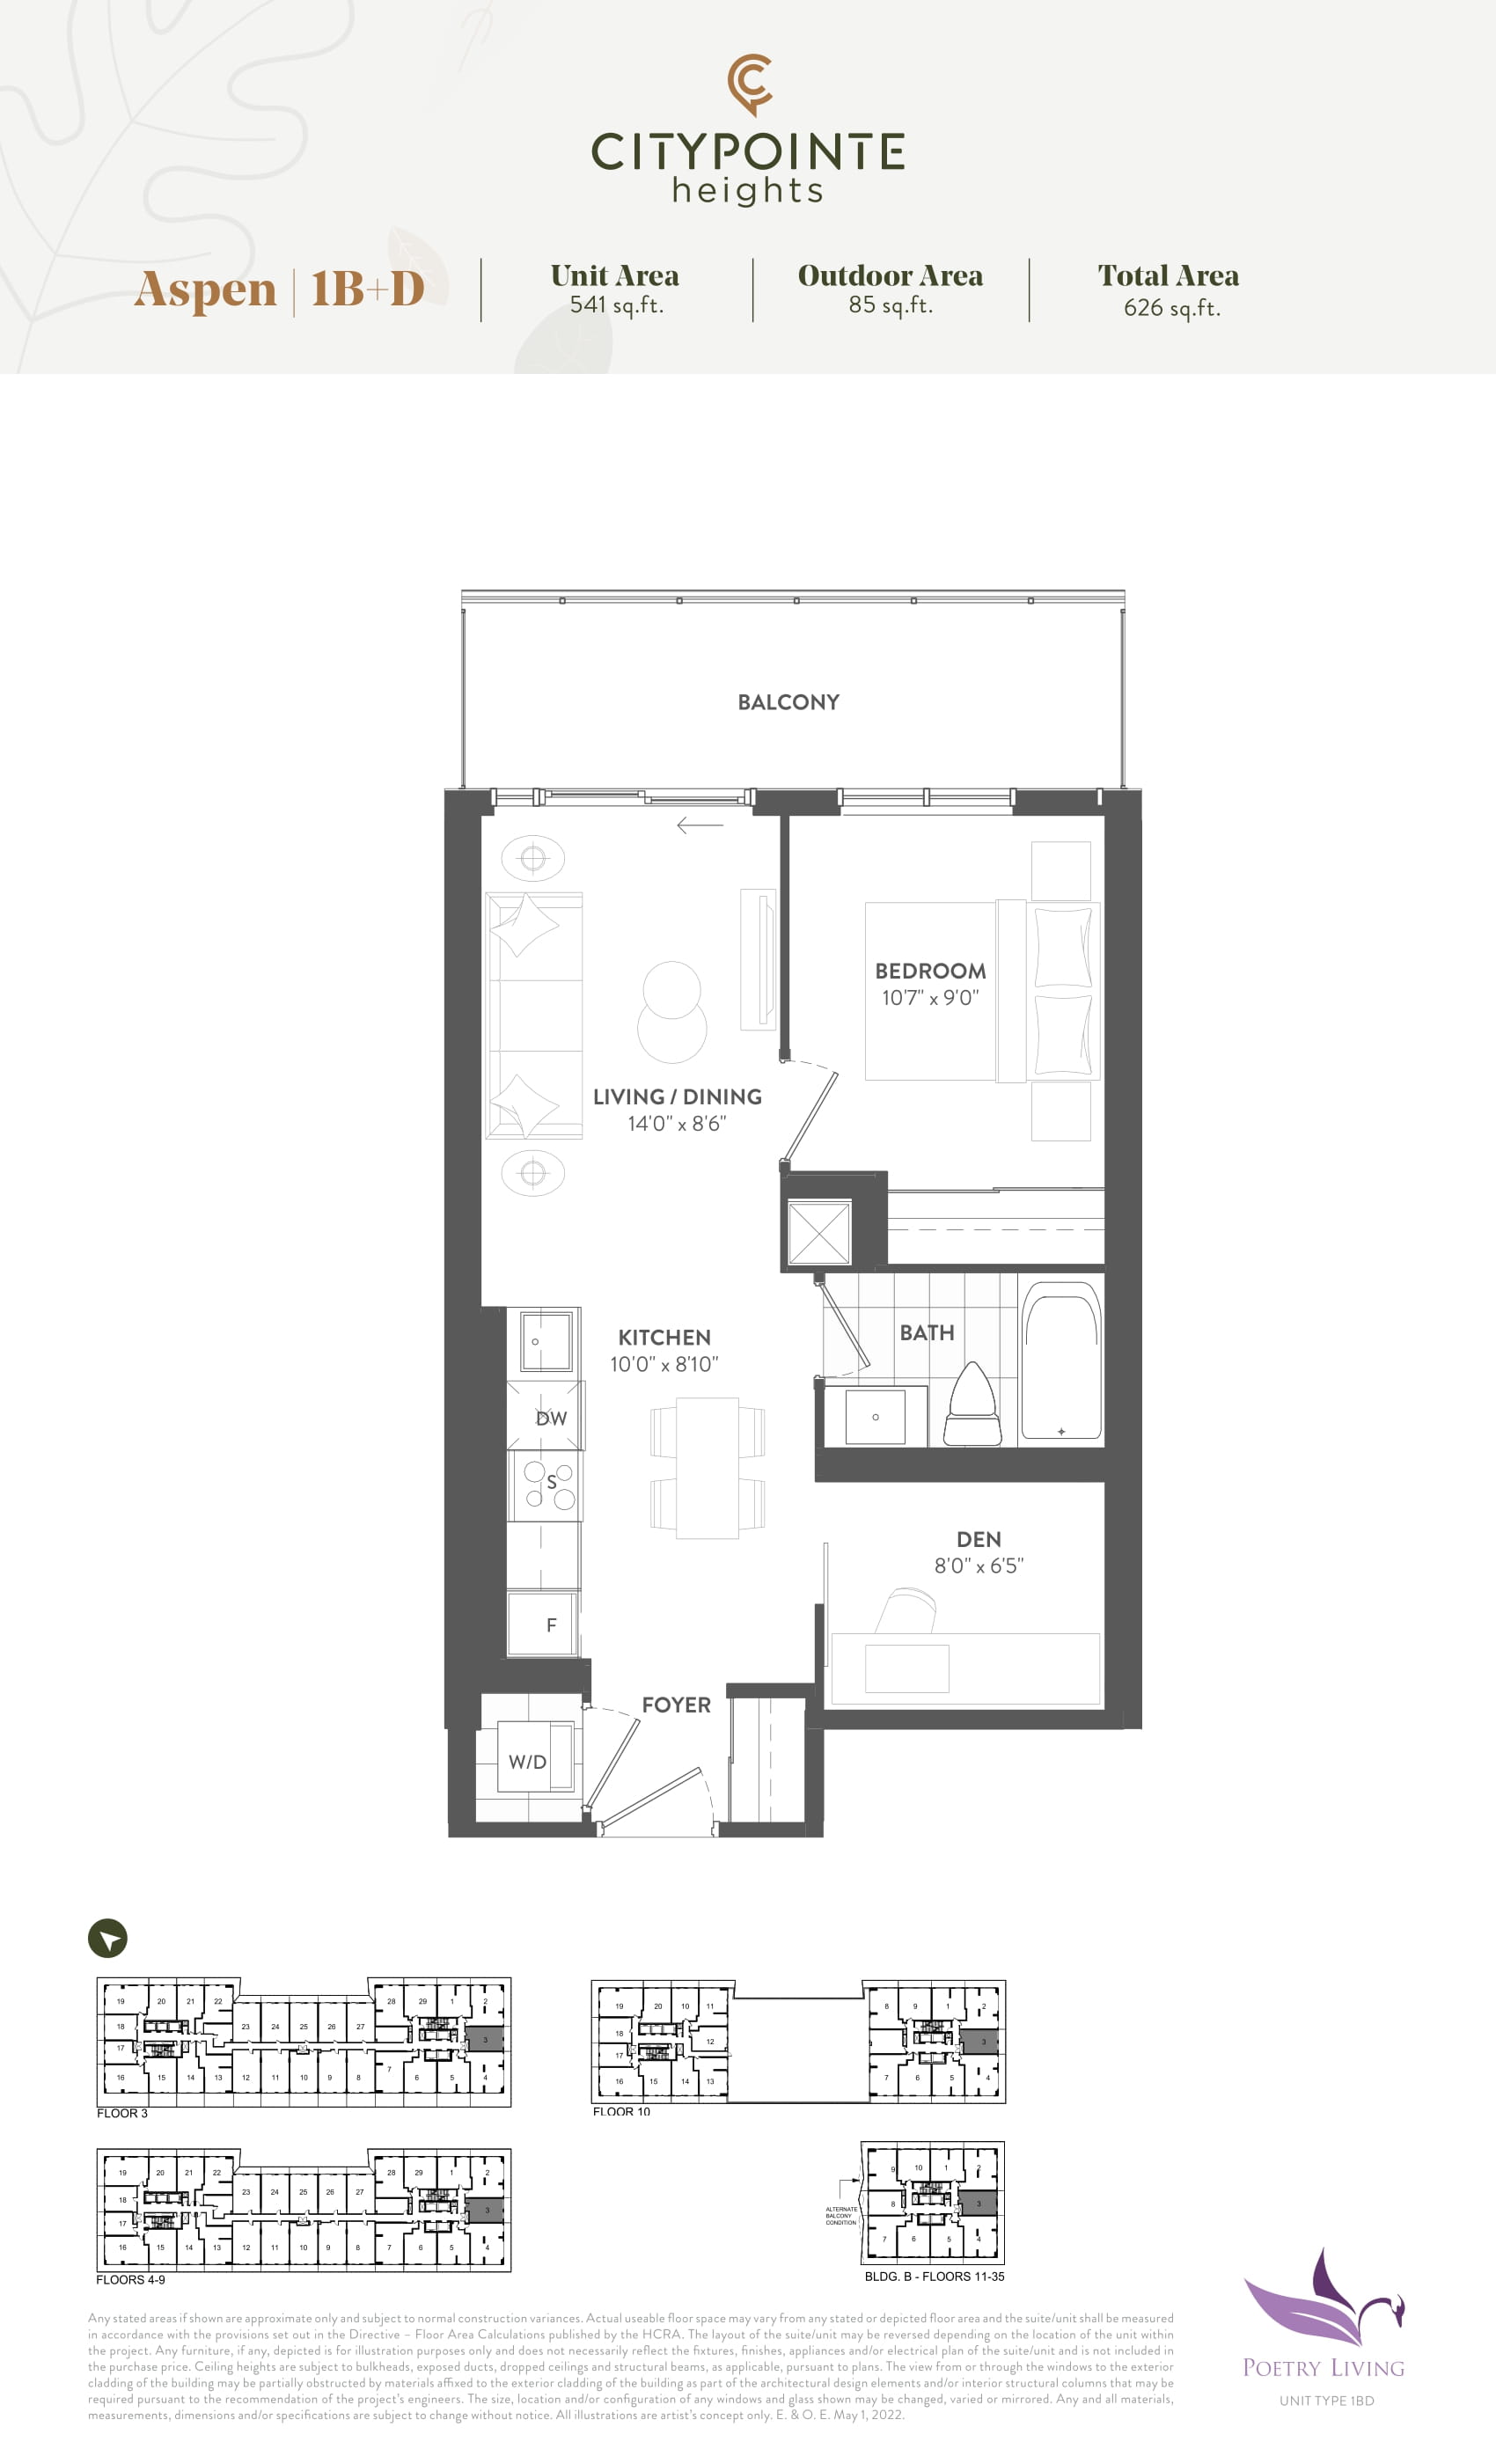  Floor Plan of CityPointe Heights with undefined beds